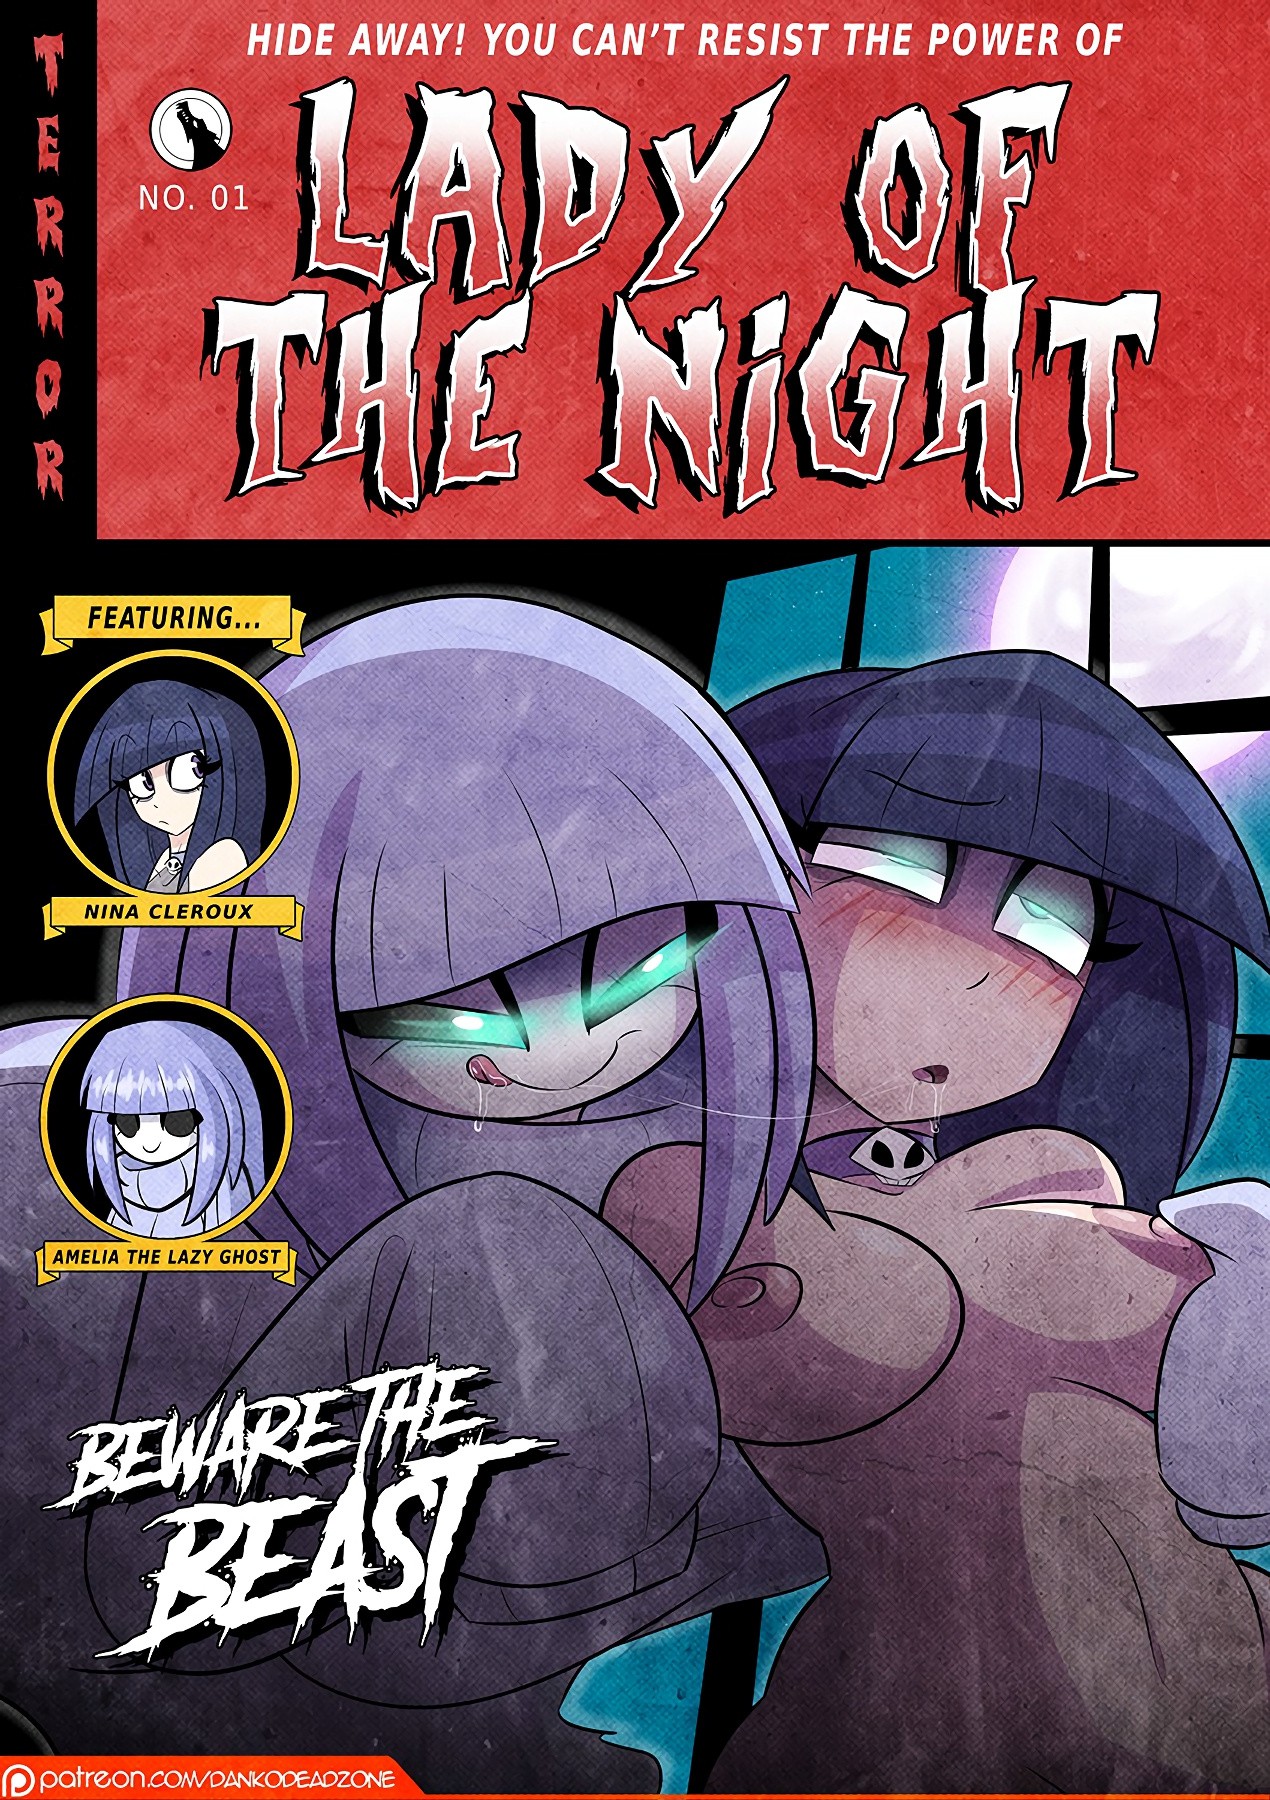 Lady of the Night Issue 1 porn comic picture 1